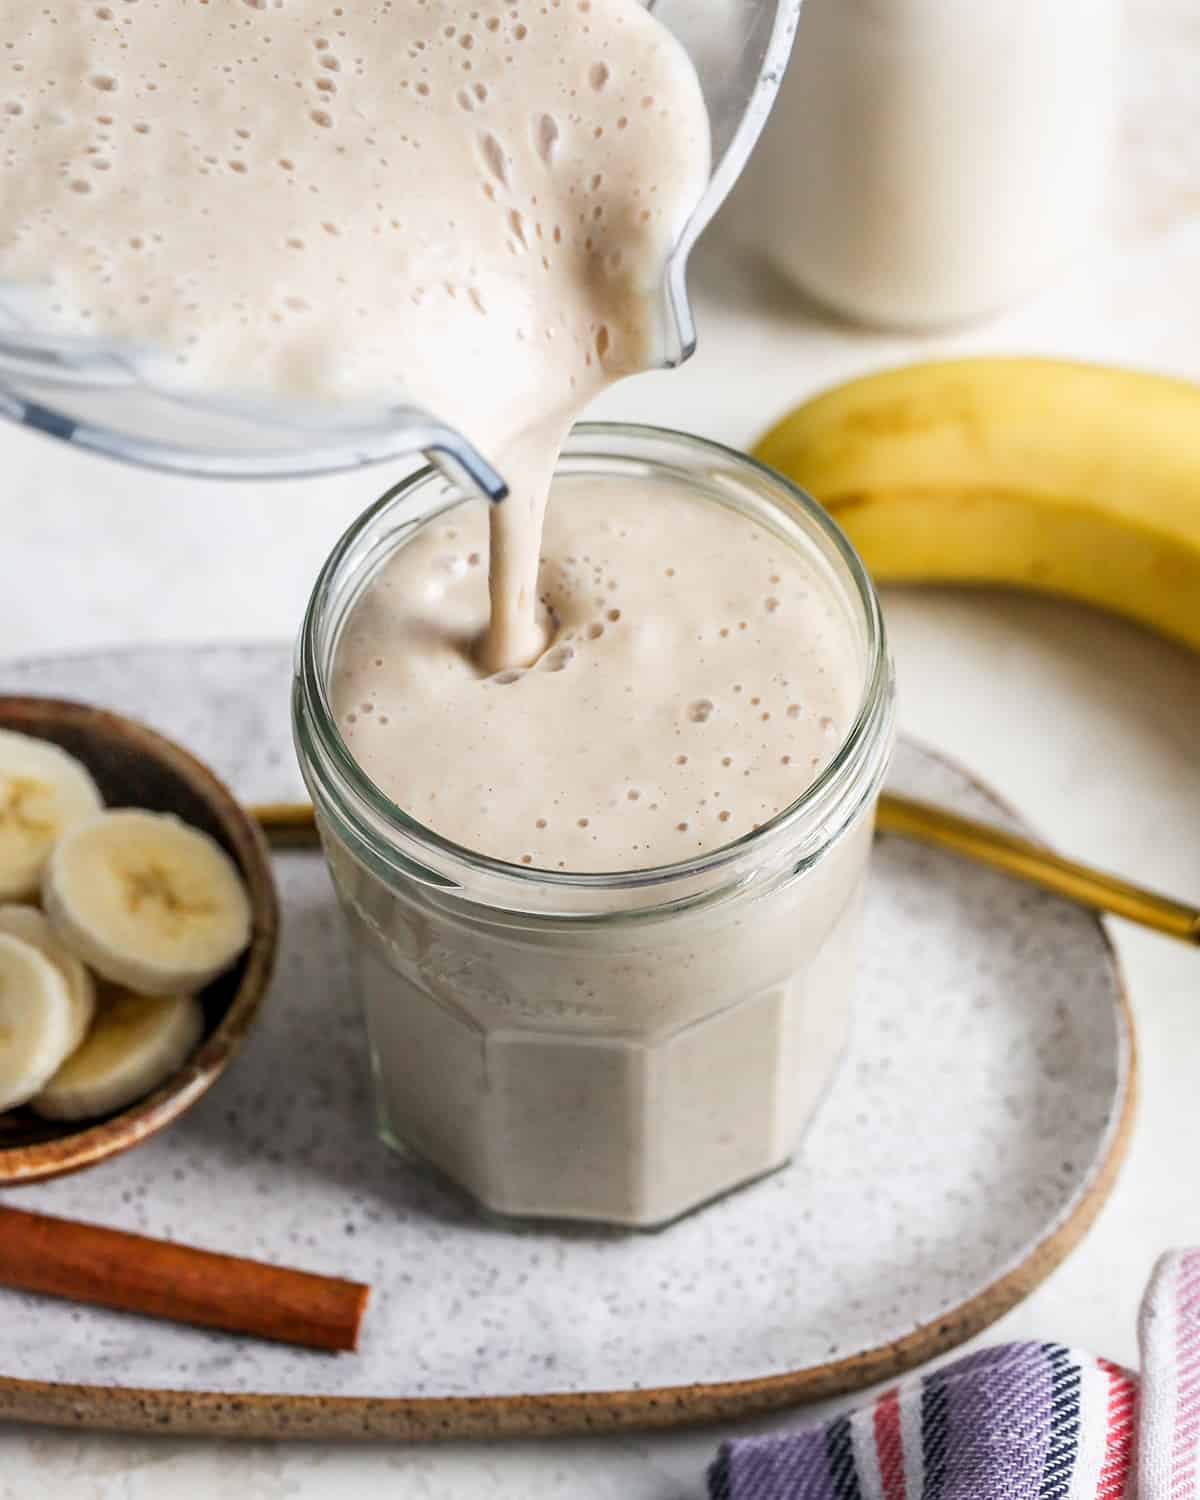 Banana smoothie being poured from the blending container into a glass 